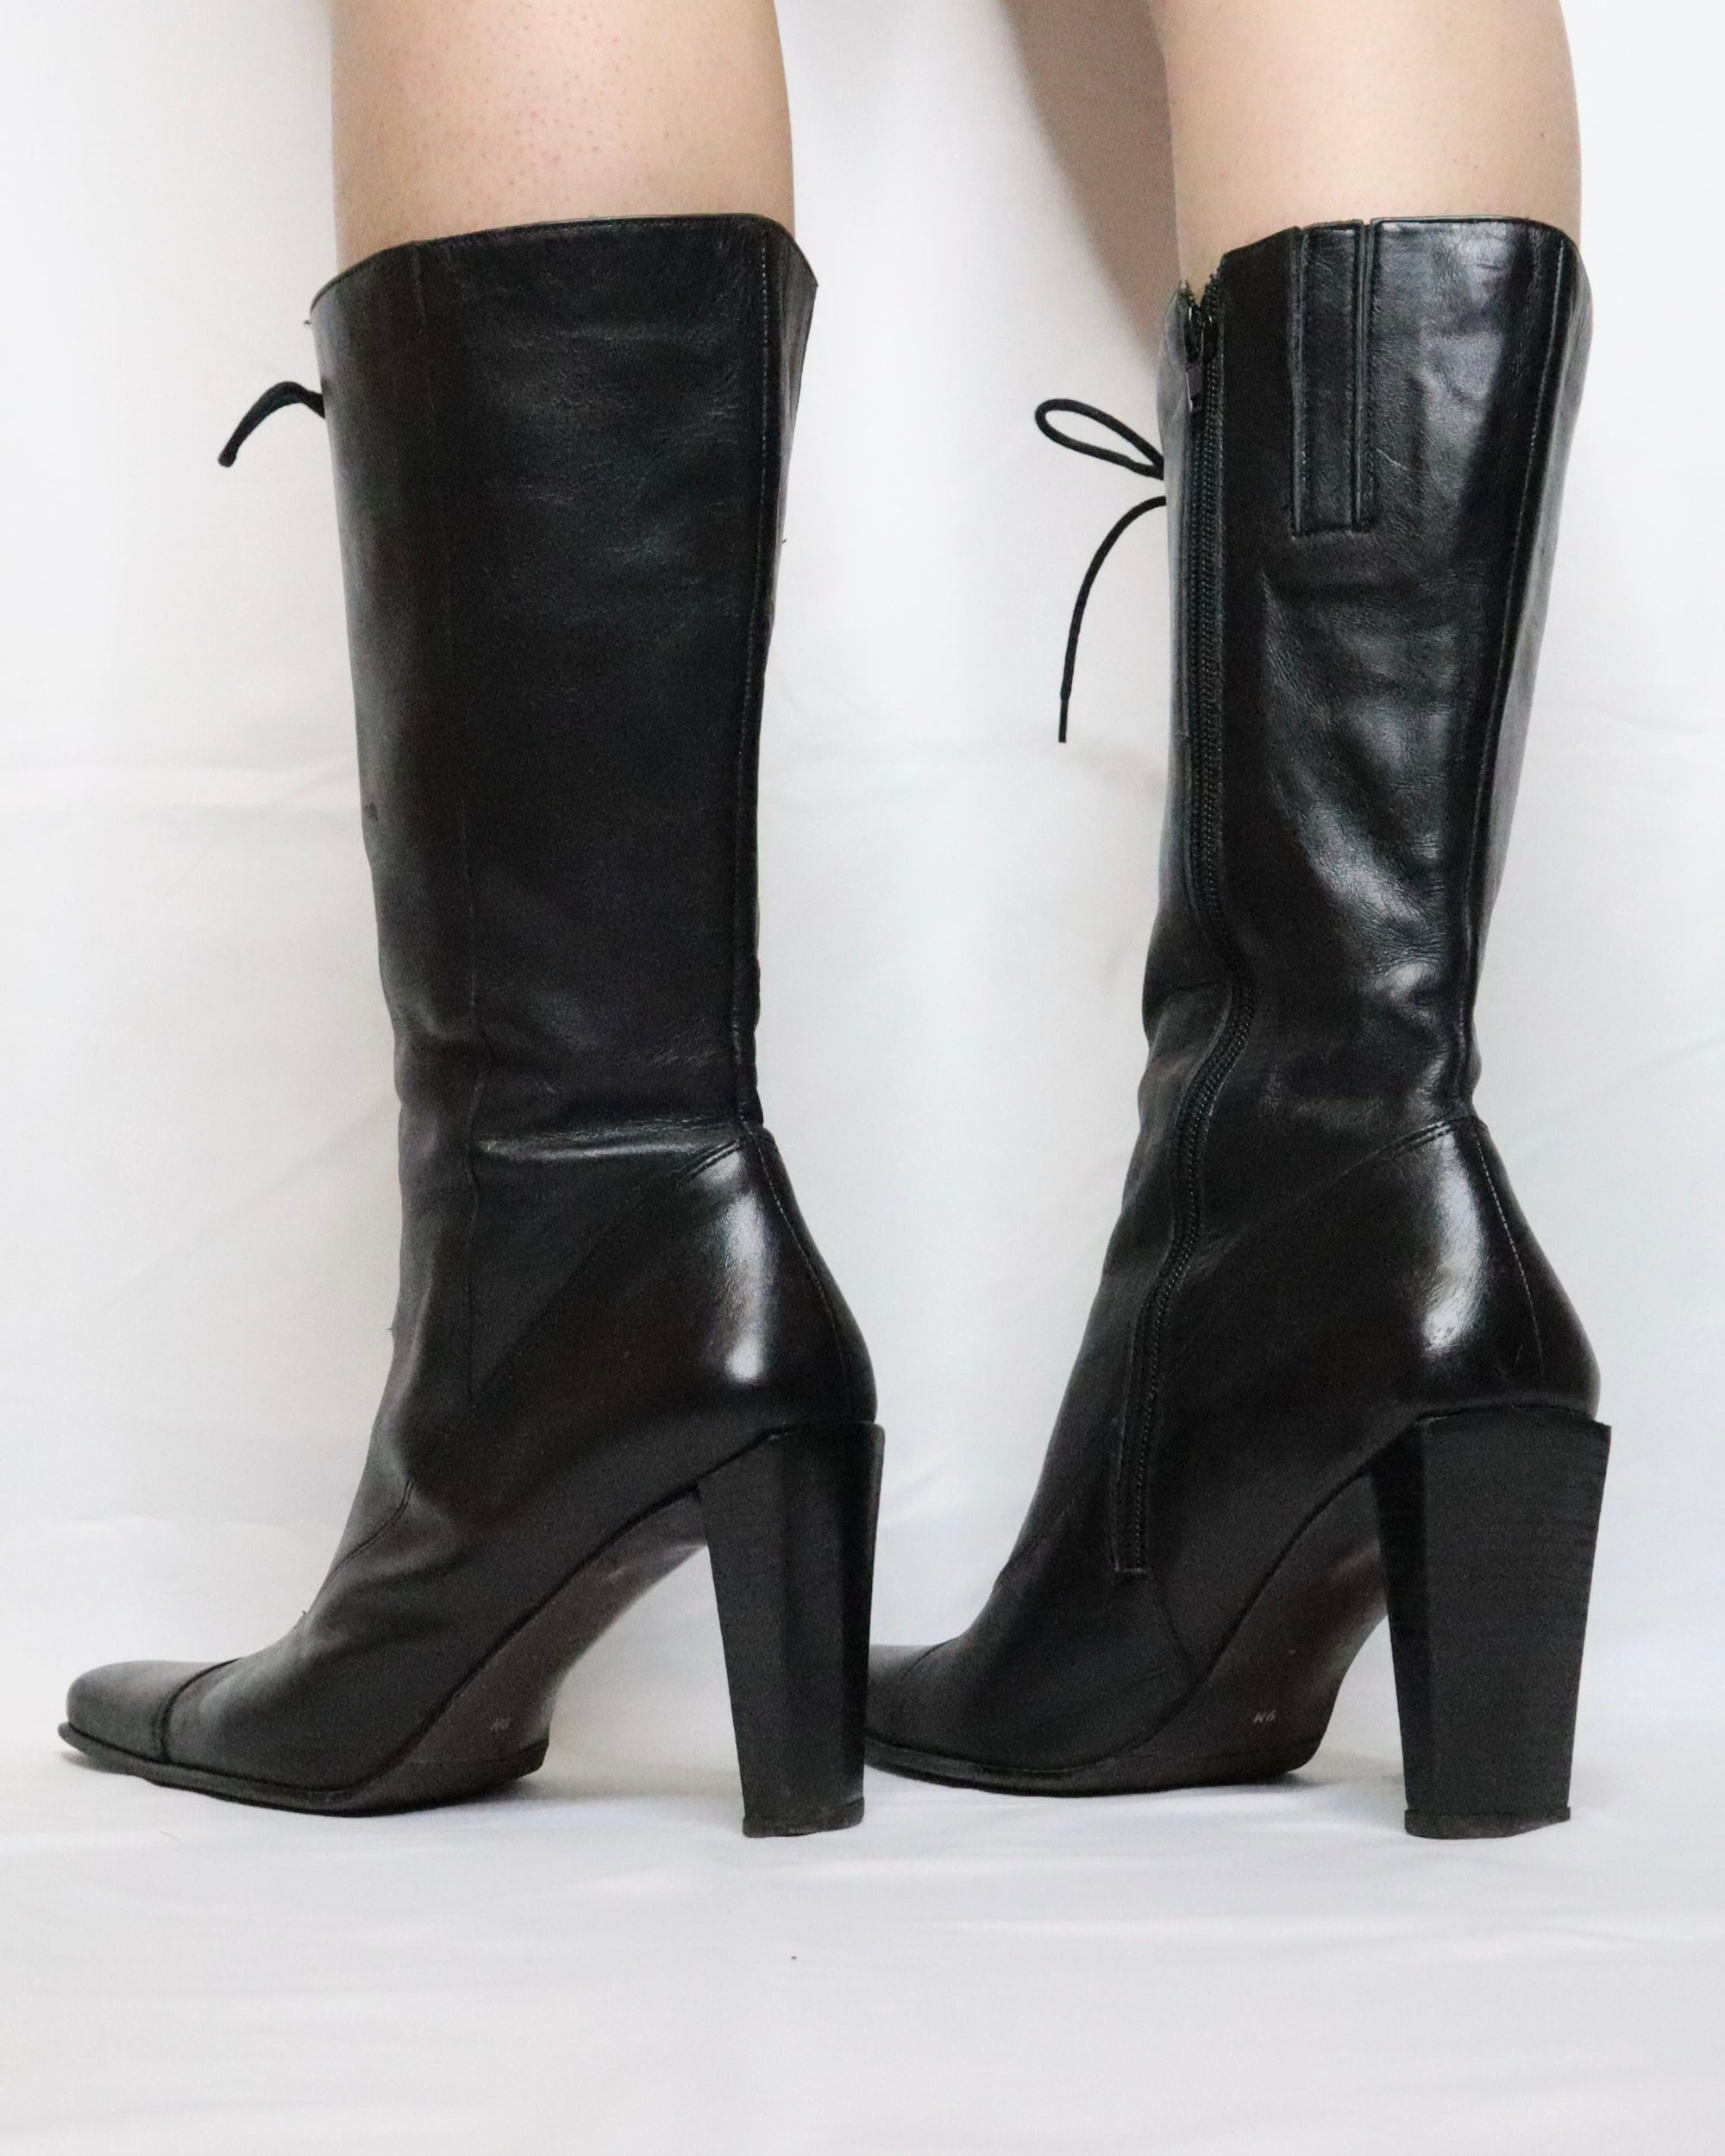 Black Leather Lace Up Boots (8.5-9 US) 